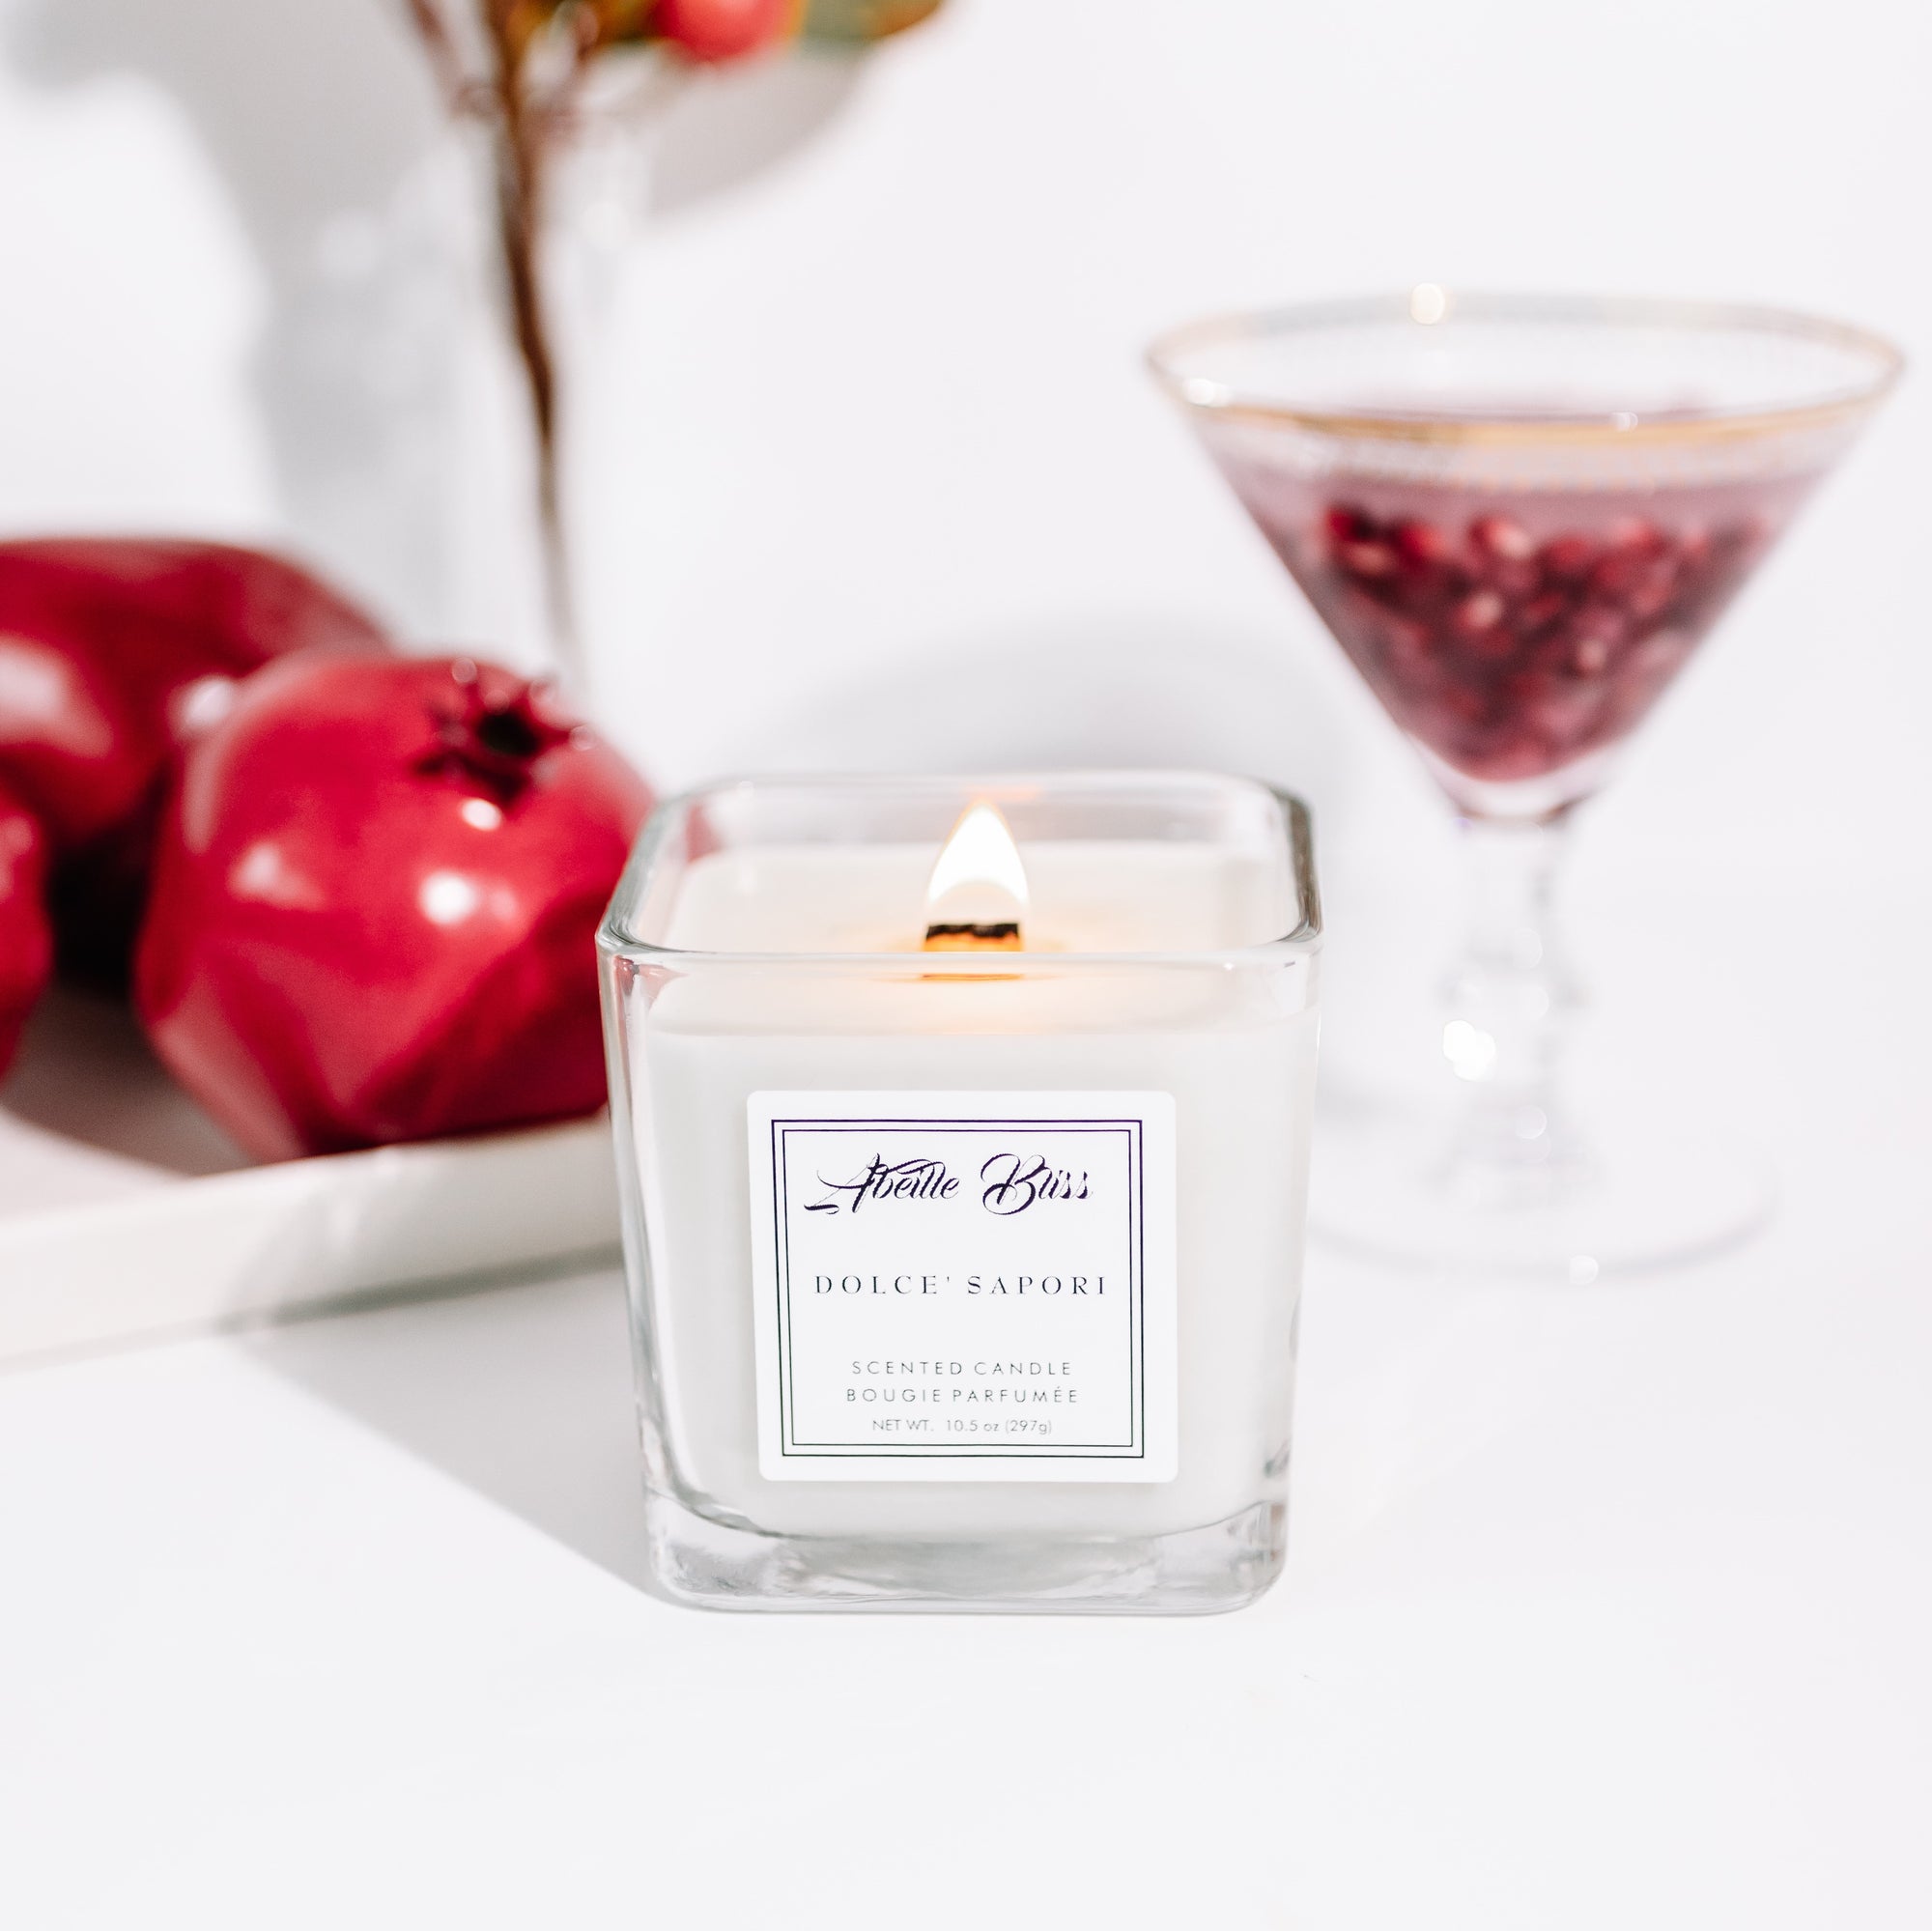 Dolce&#39; Sapori Wooden Wick Coconut Soy Wax Luxury Candle